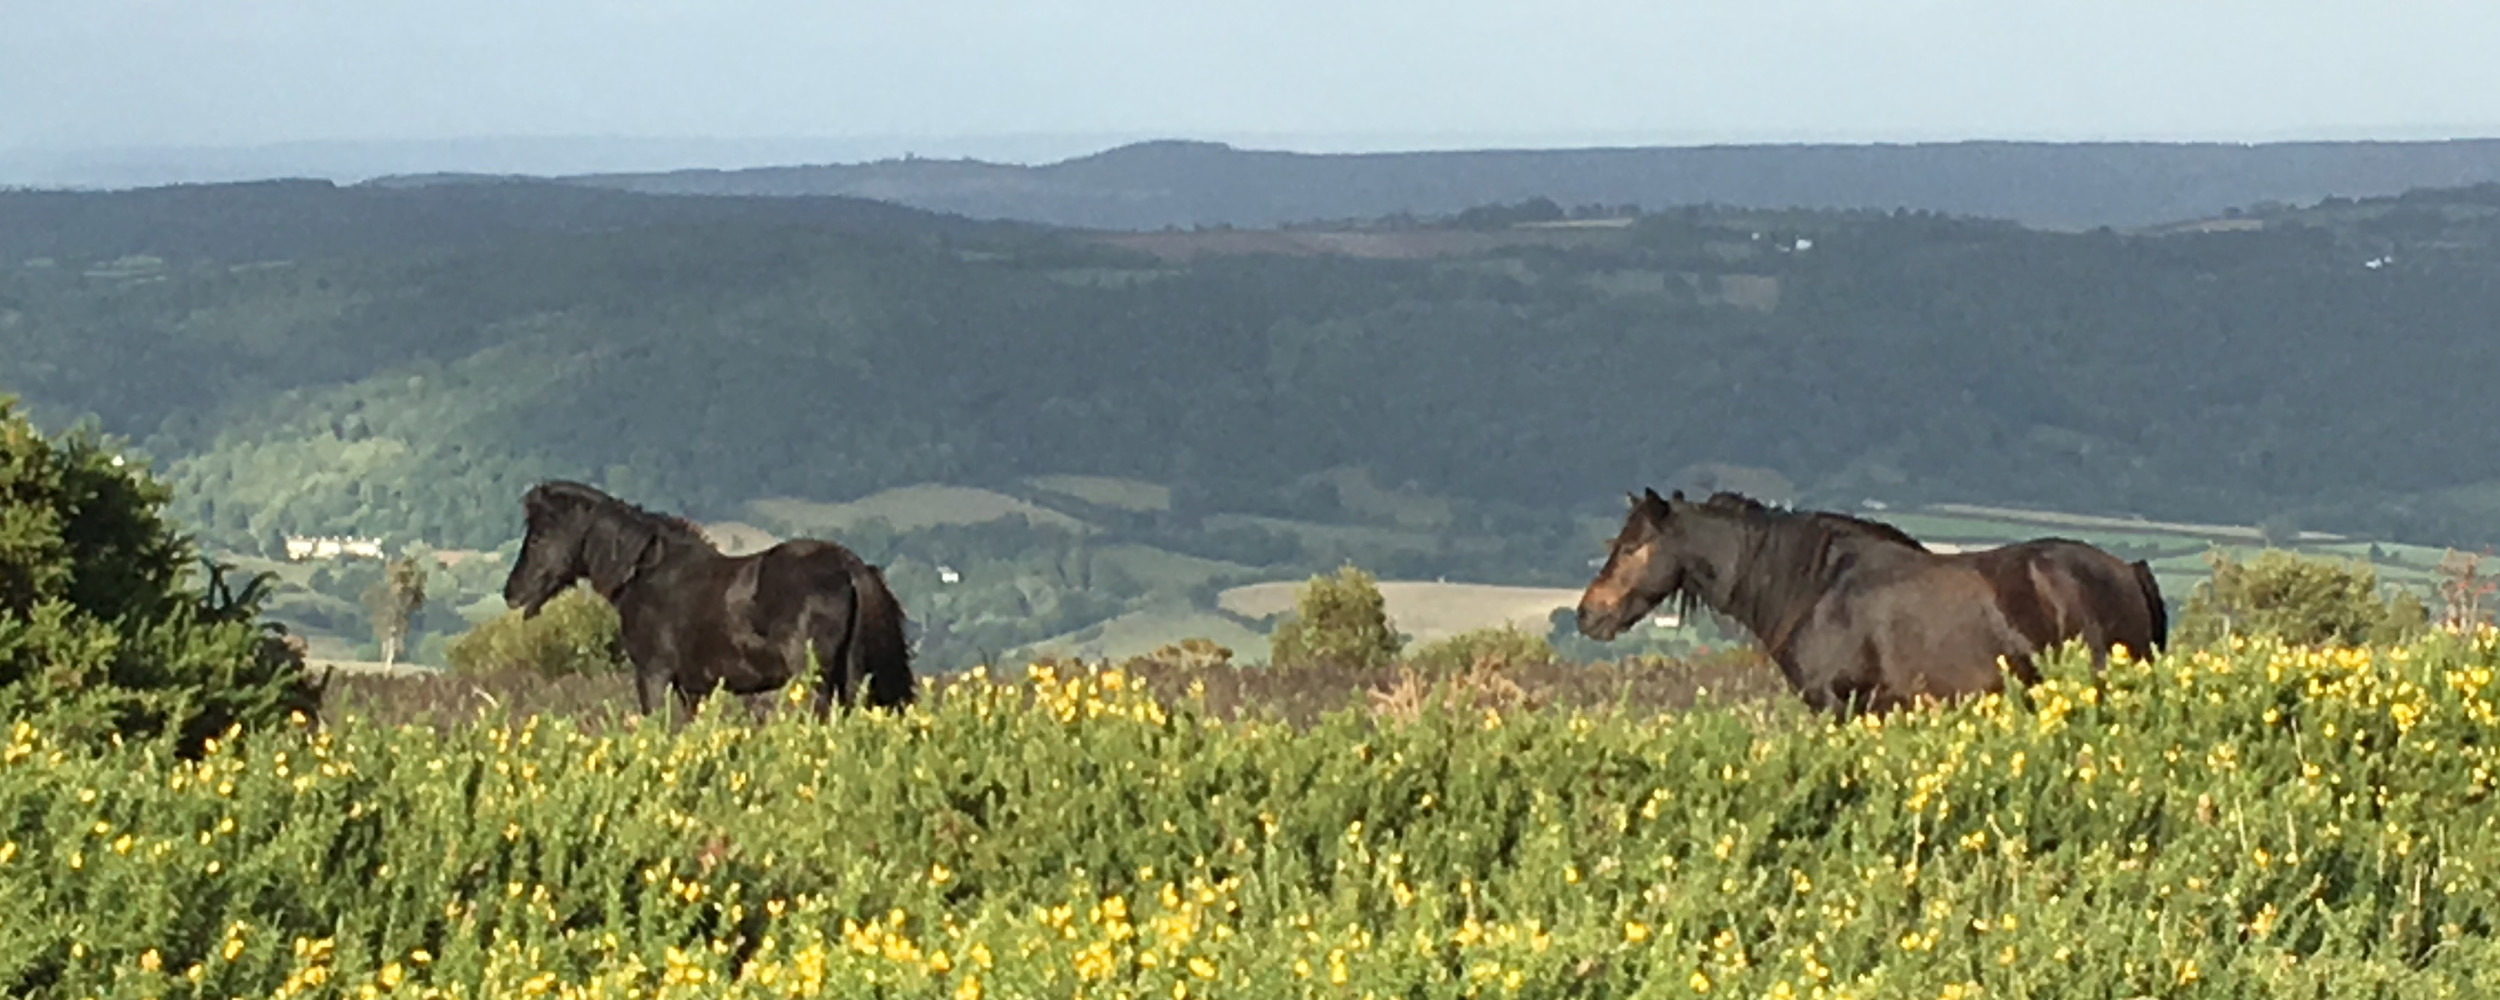 Ponies in the Gorse